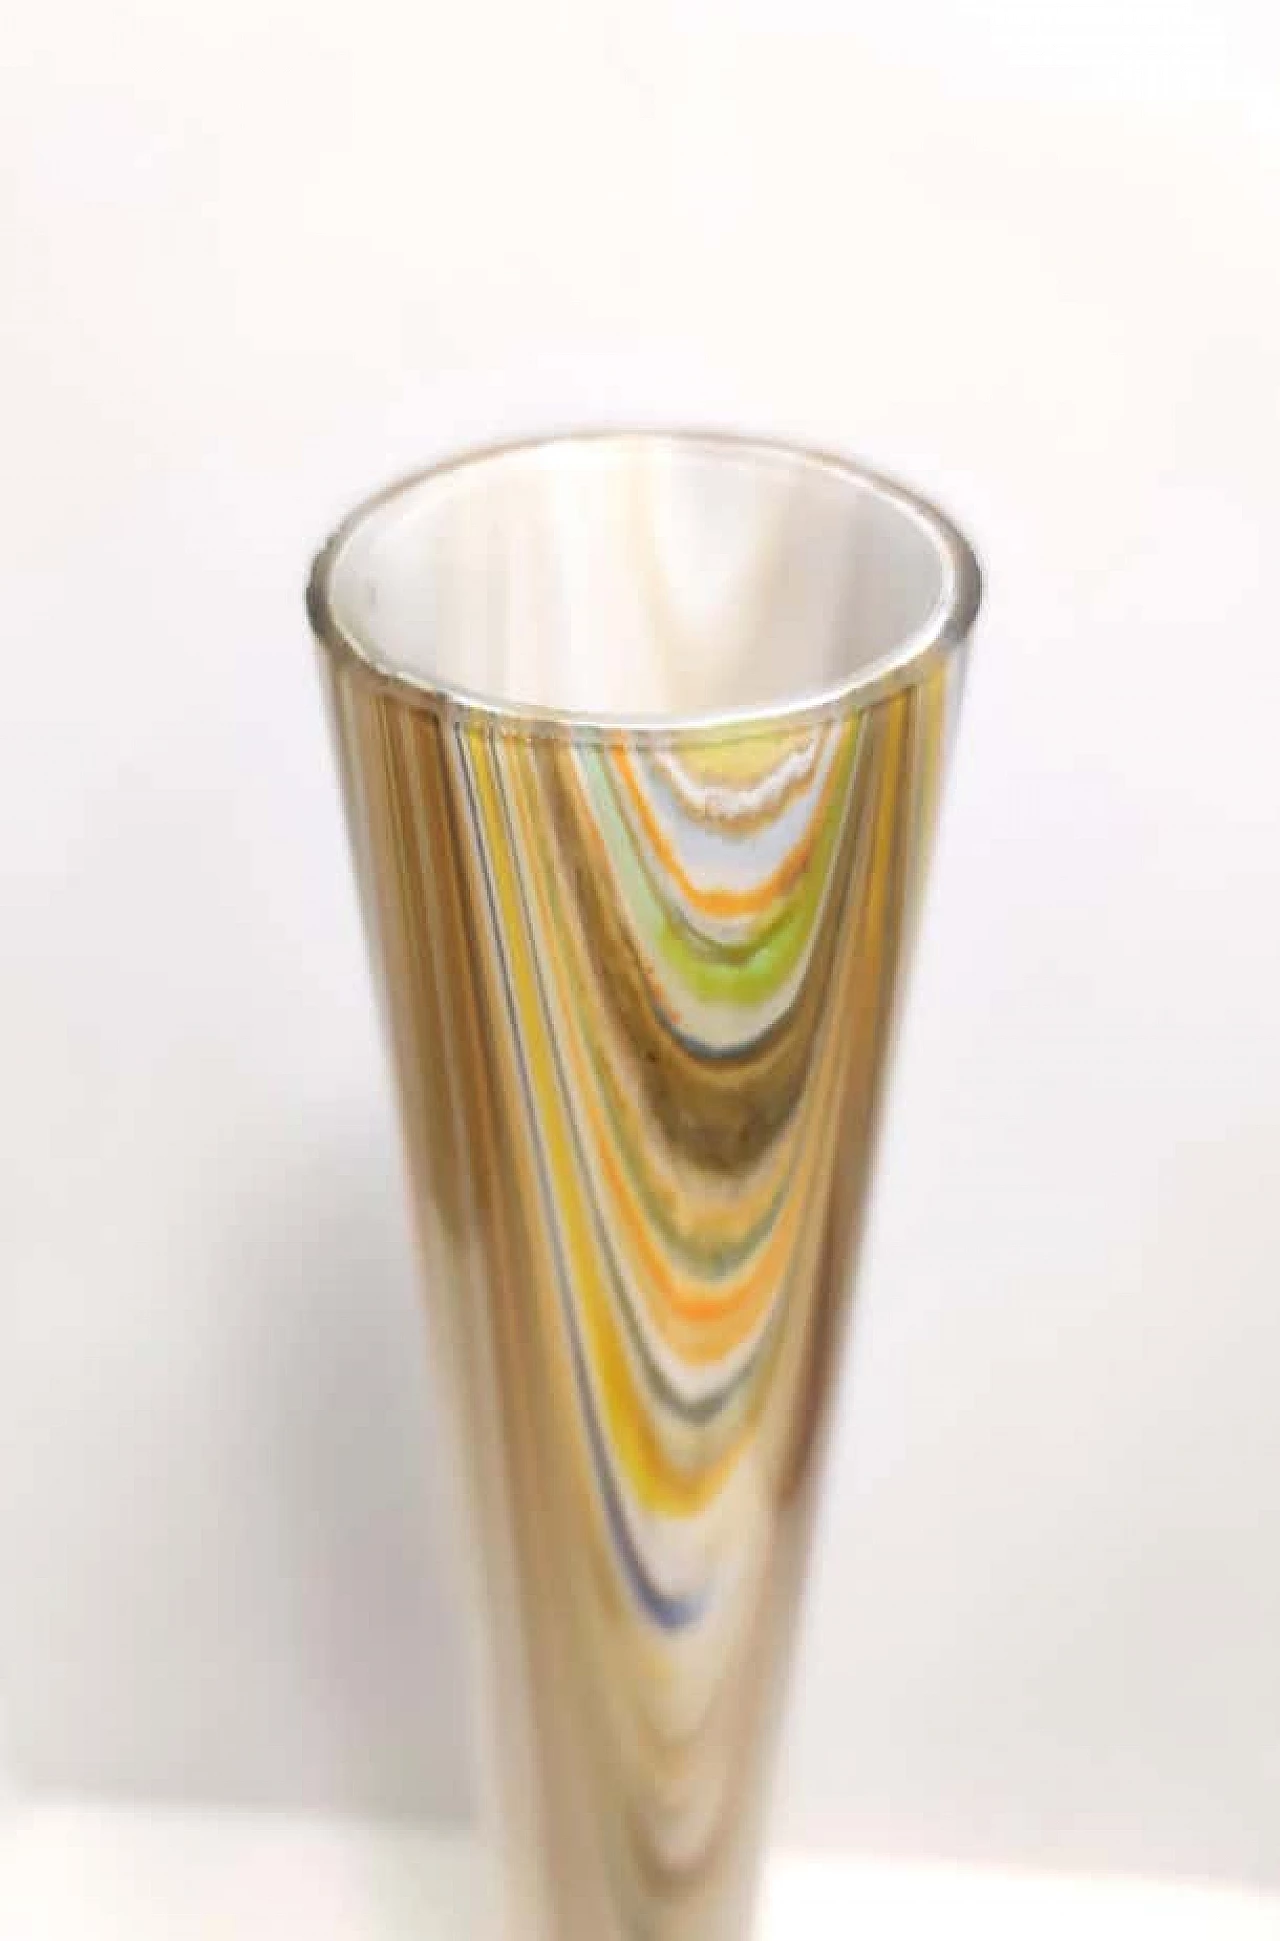 Phoenician orange glass vase attributed to Fratelli Toso, 1960s 19